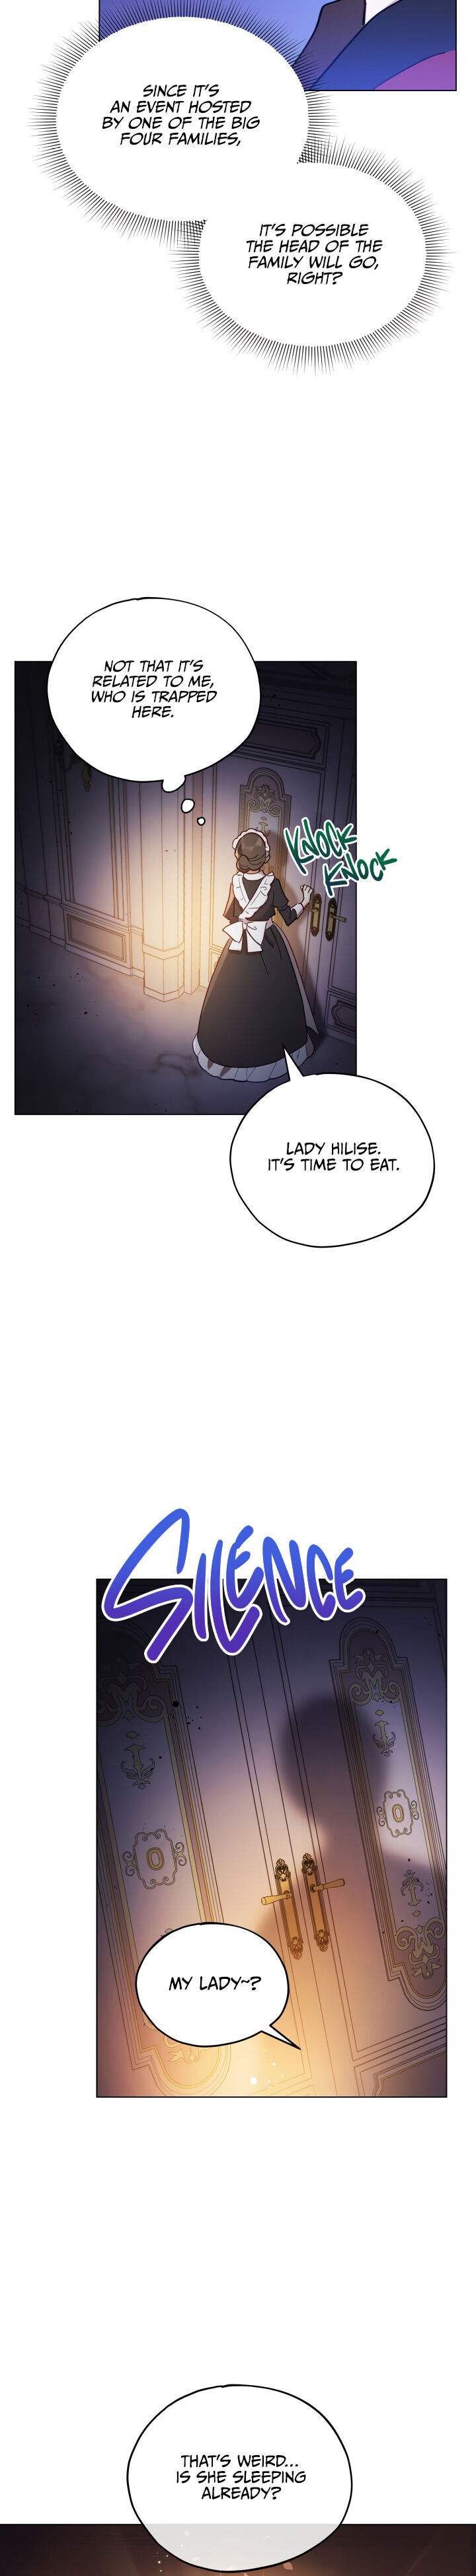 Untouchable Lady - Chapter 10 Page 6